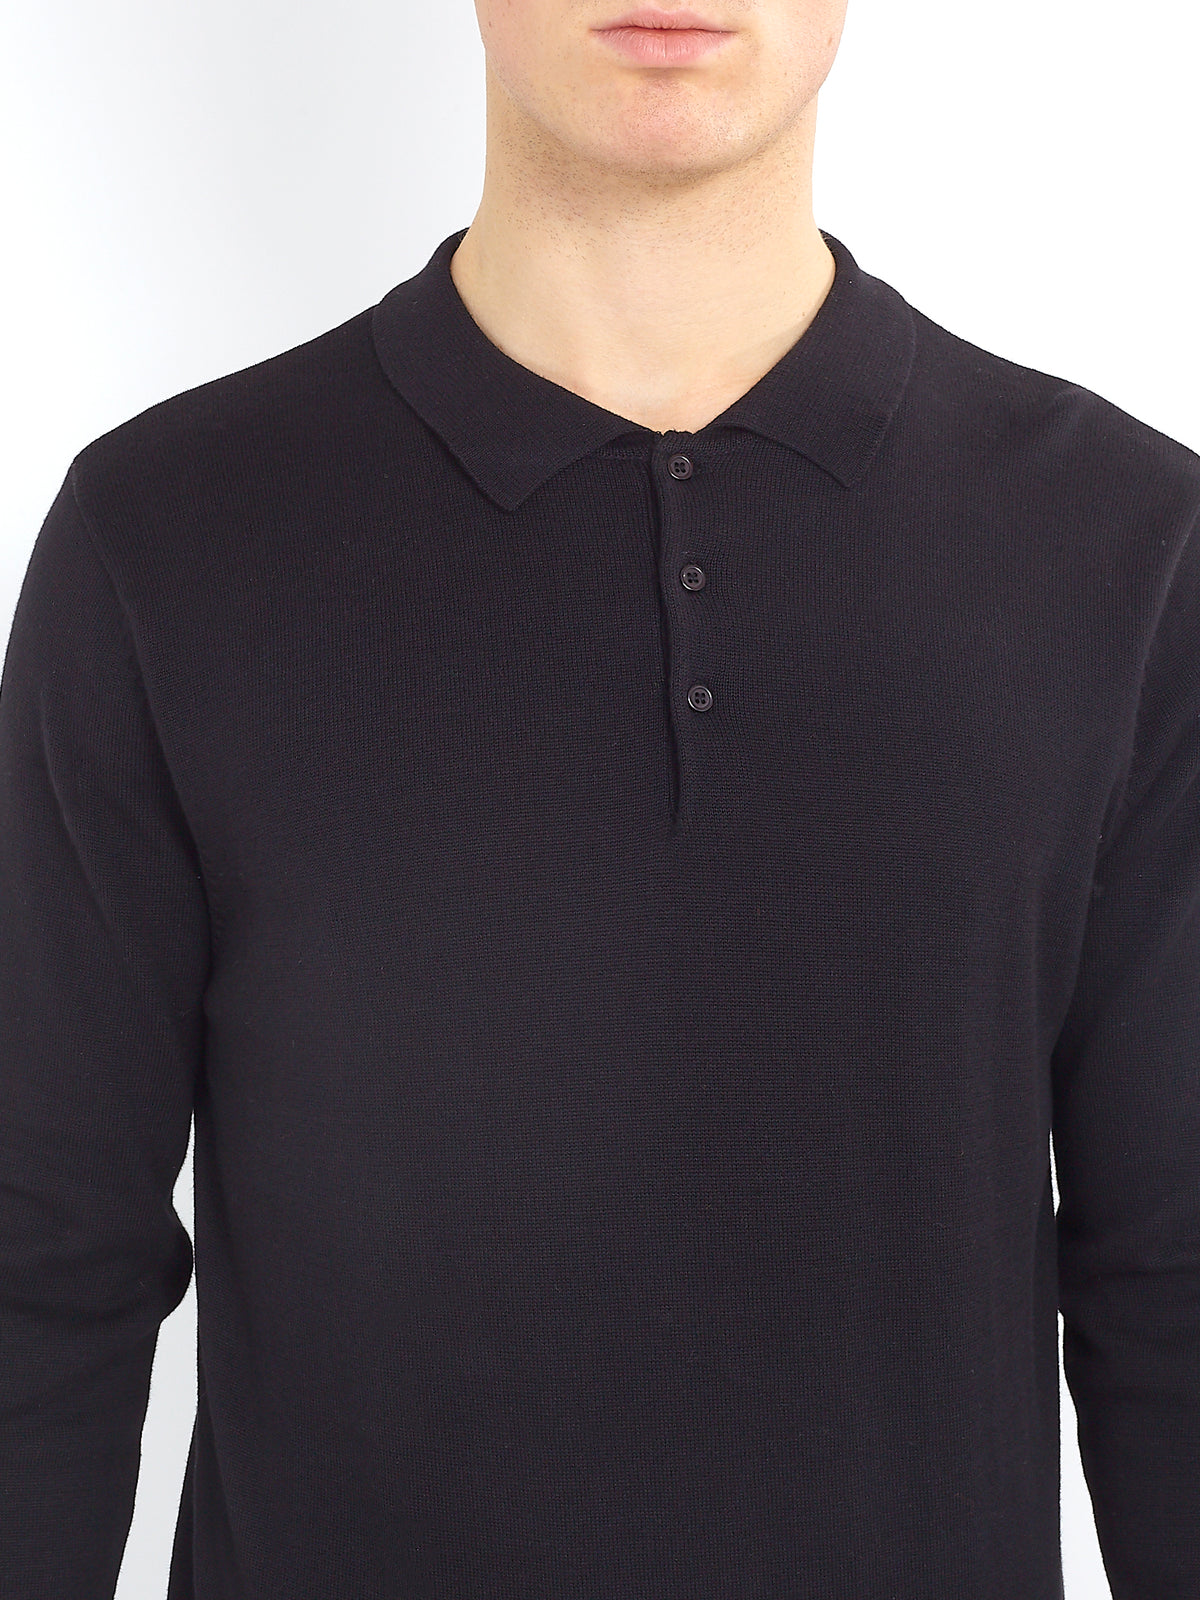 Mens Knitted Polo Shirt by Brave Soul Long Sleeved, 05, Mk-181Placket, Jet Black